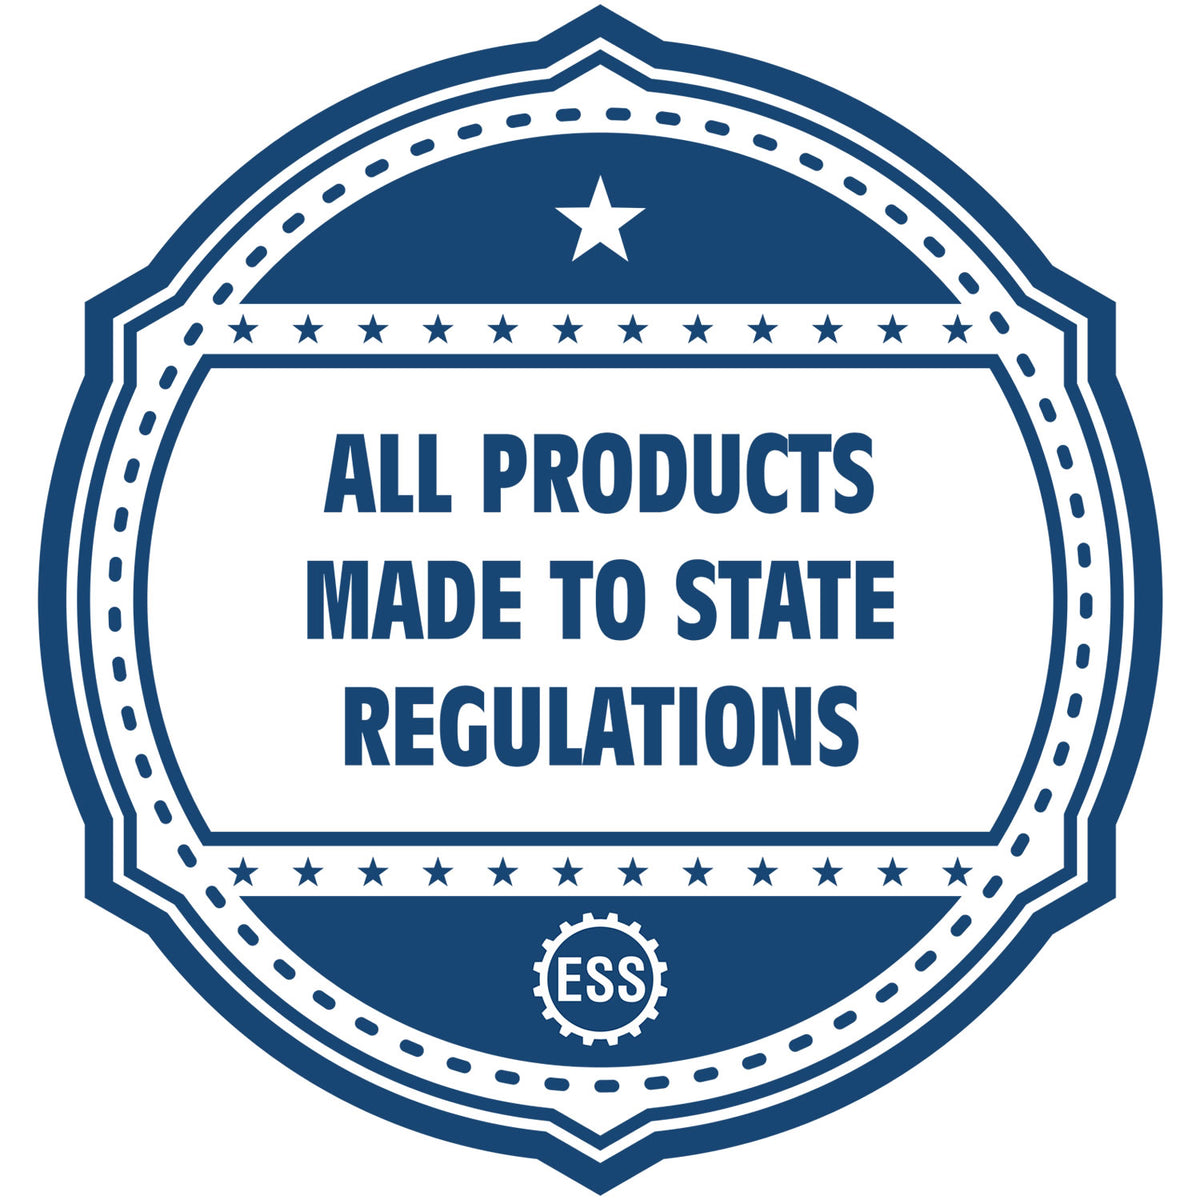 An icon or badge element for the Slim Pre-Inked State Seal Notary Stamp for Delaware showing that this product is made in compliance with state regulations.